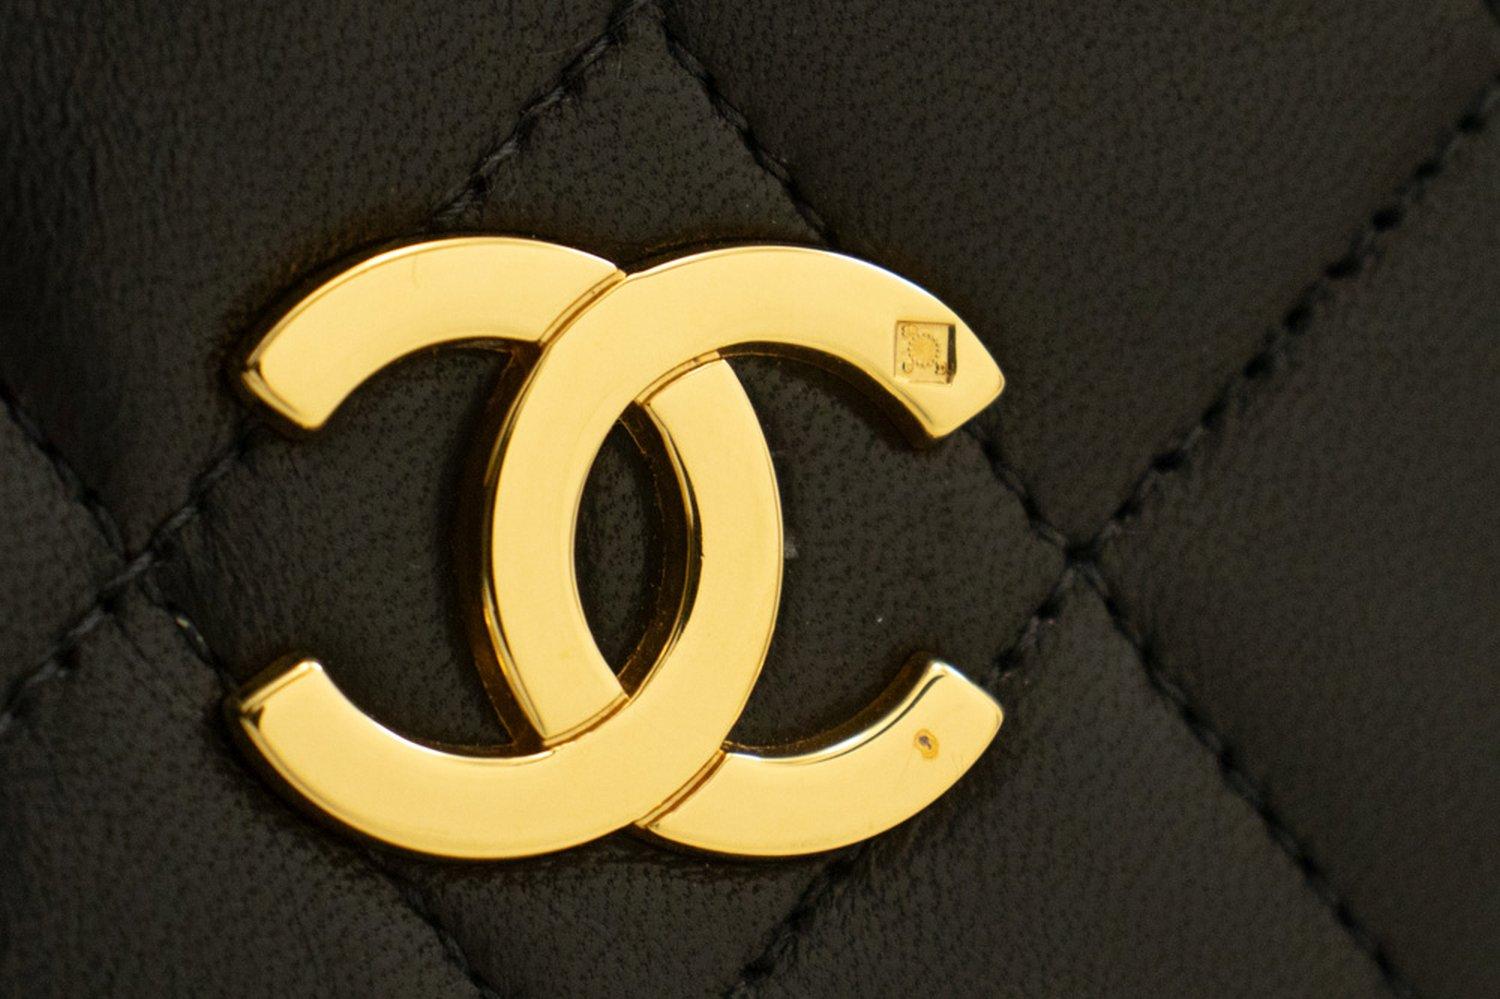 CHANEL Full Chain Flap Shoulder Bag Black Clutch Quilted Lambskin For Sale 8